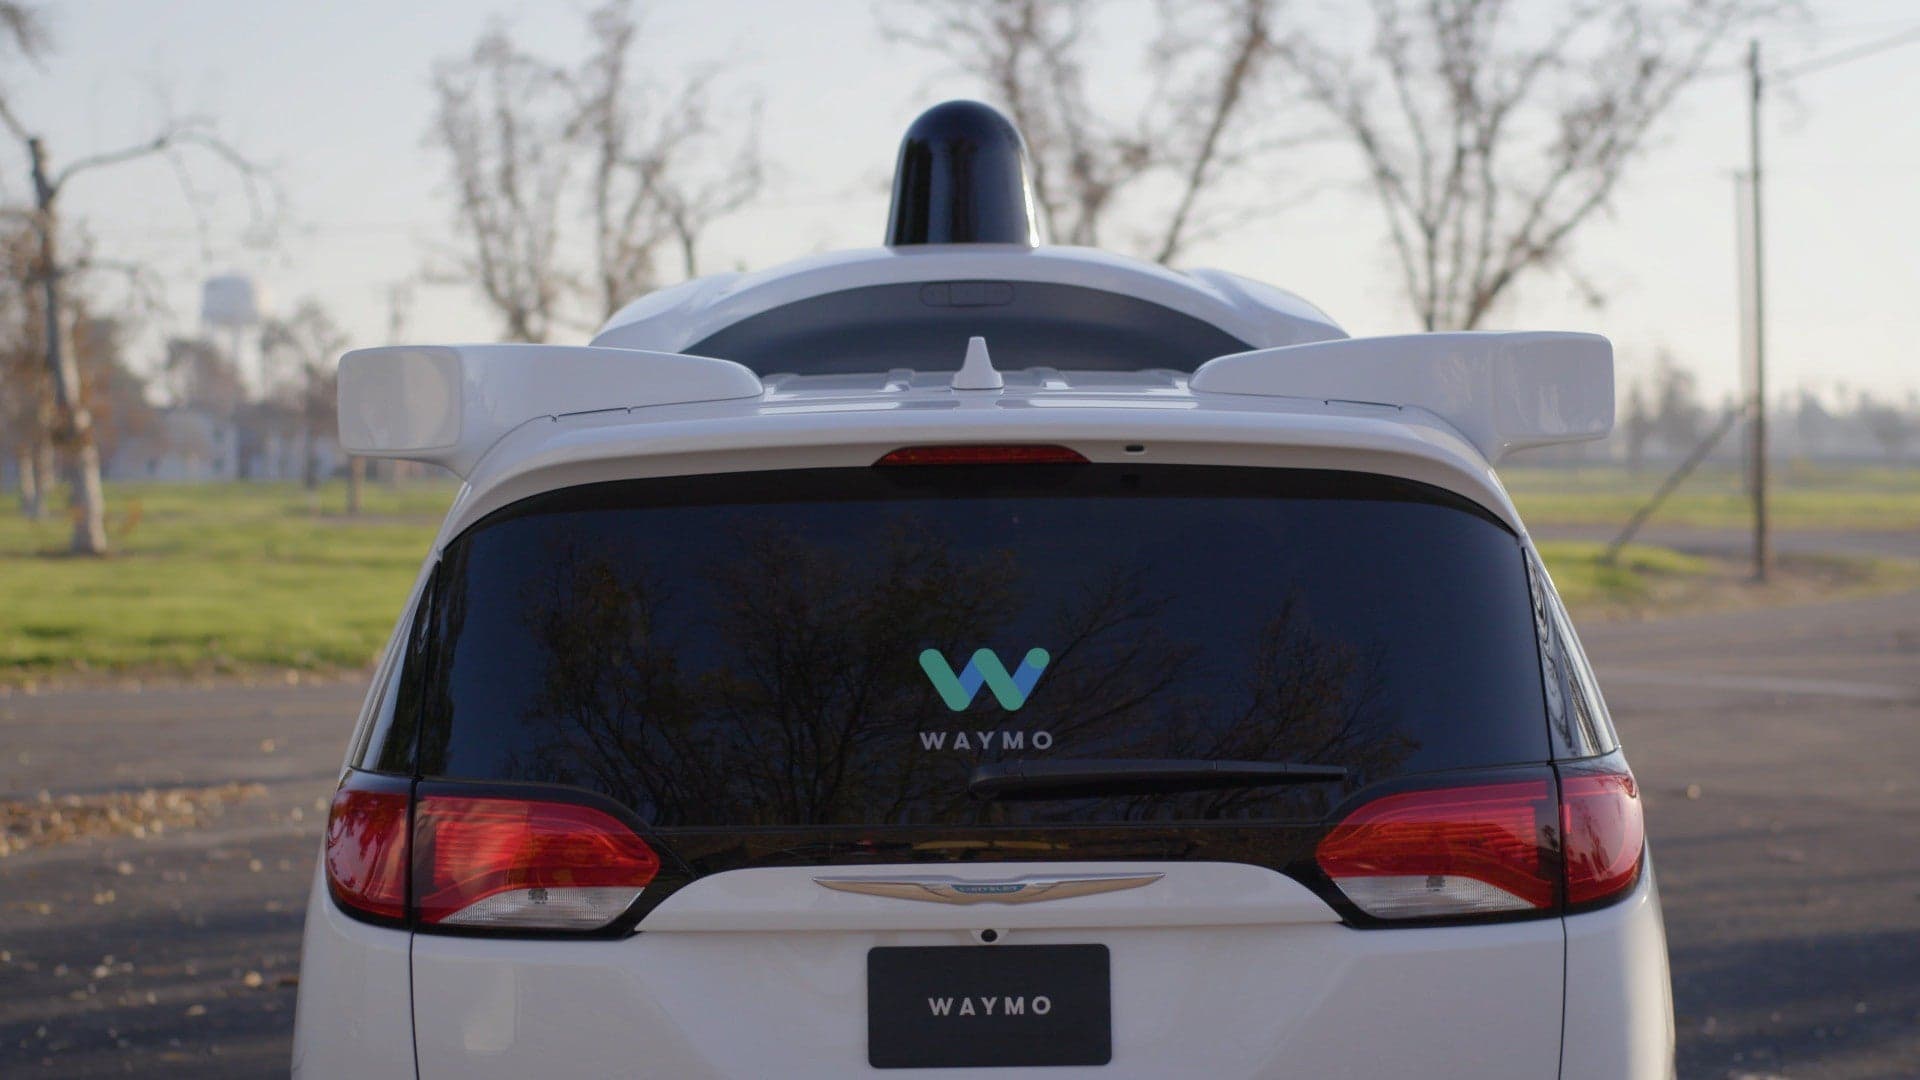 Waymo’s Self-Driving Technology Test Car Hit by Red-Light Running Vehicle in Arizona